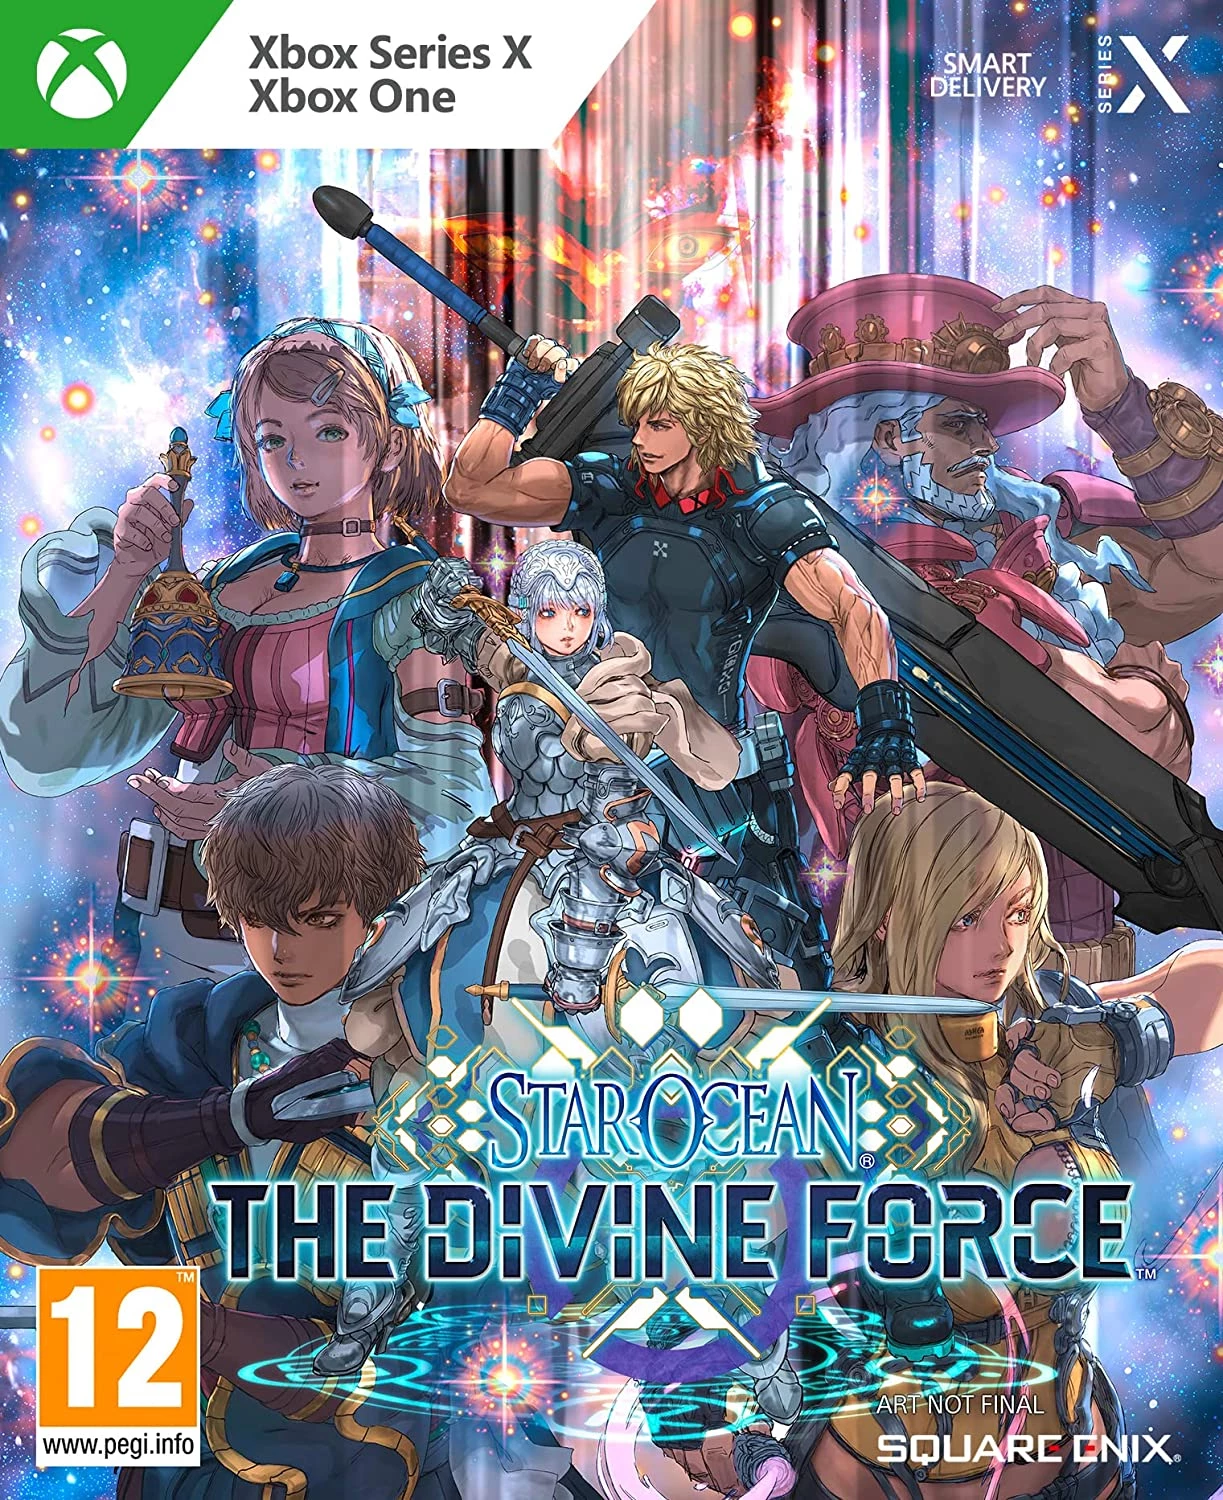 Star Ocean: The Divine Force (Xbox One), Square Enix